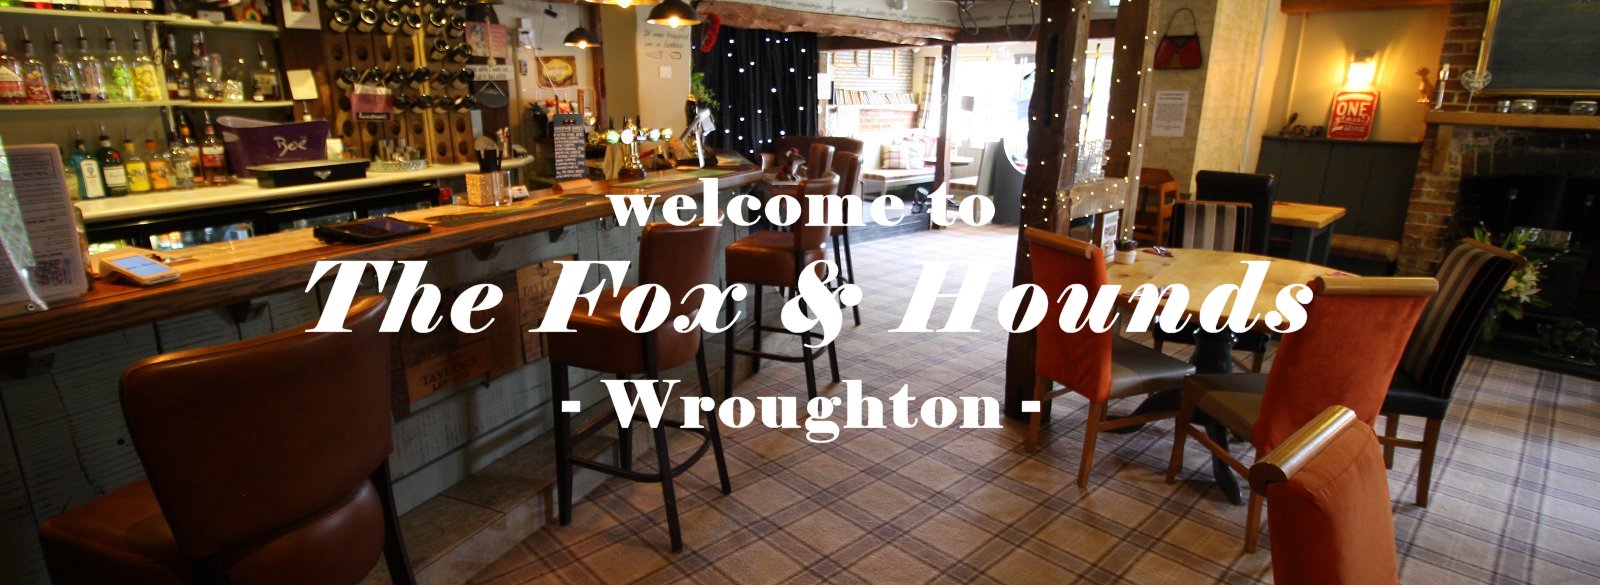 Welcome to The Fox & Hounds pub, Wroughton, Swindon